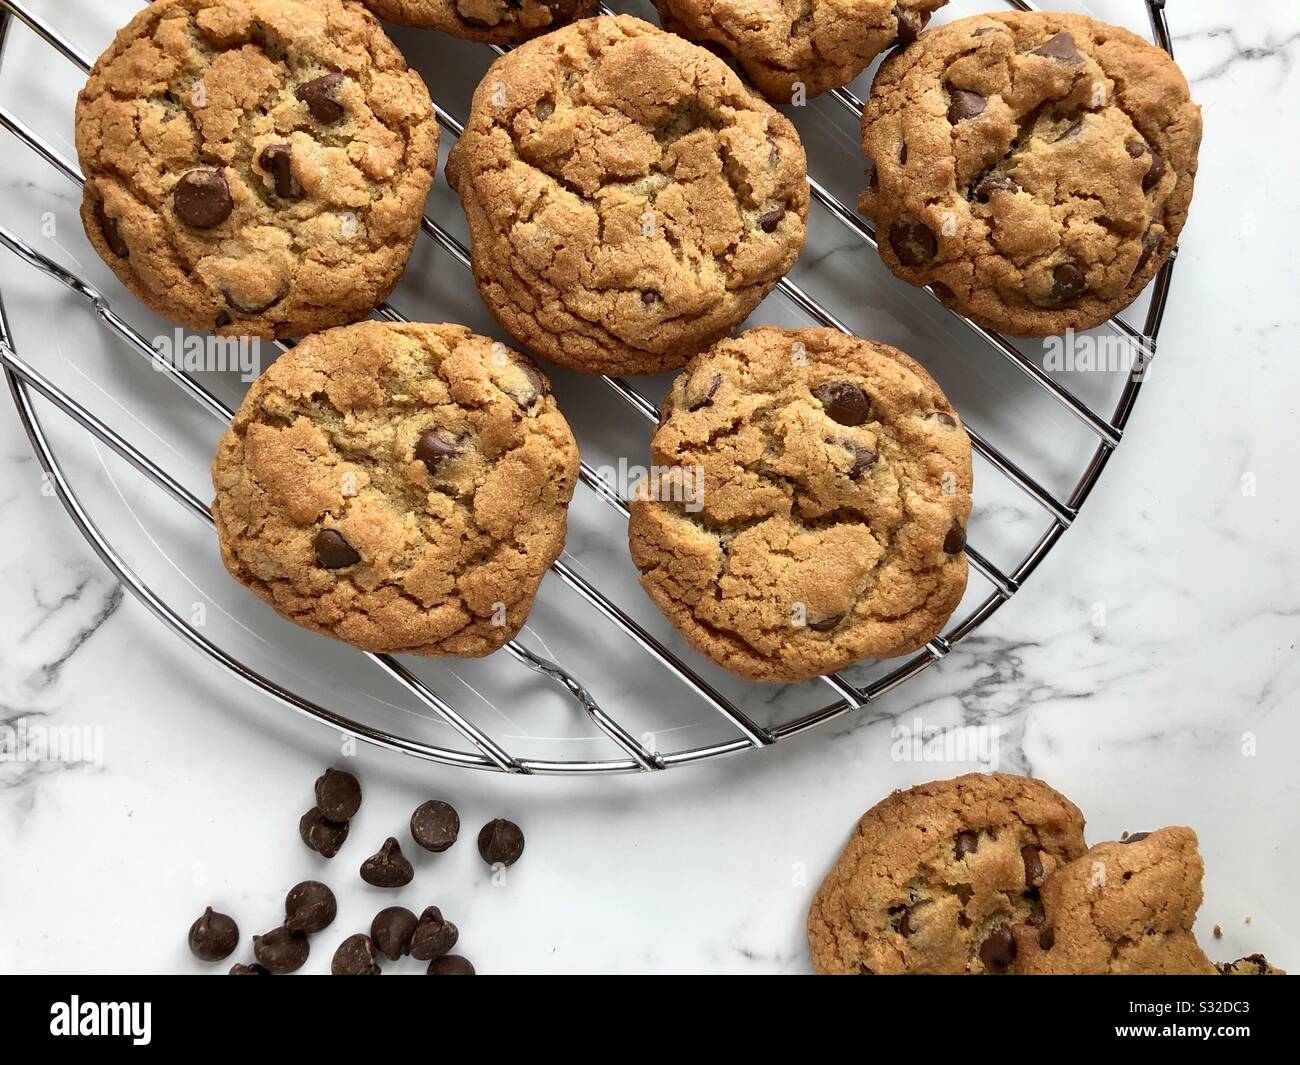 Chocolate chip cookies on a wire cooling rack Stock Photo